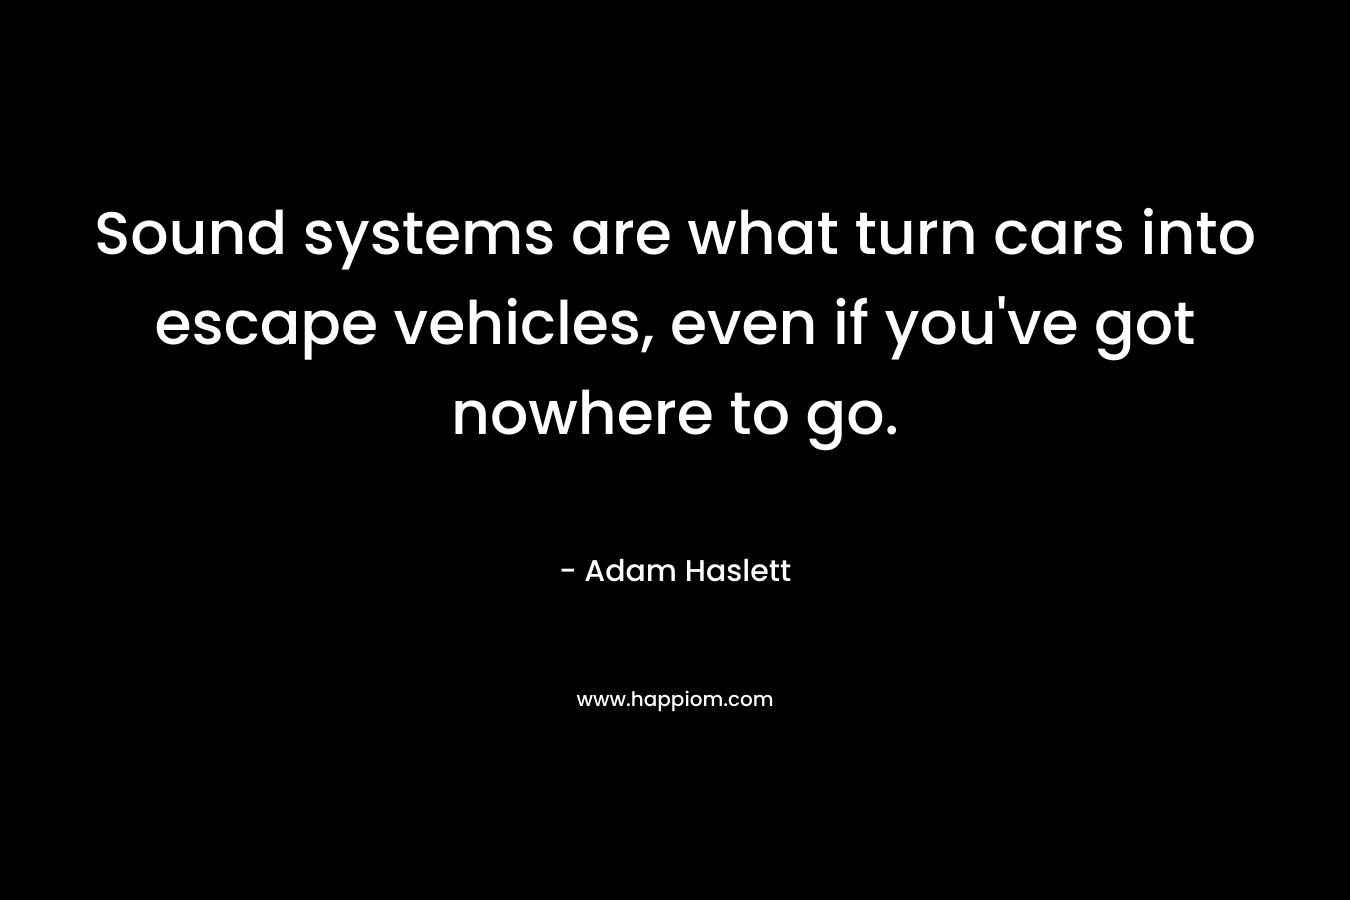 Sound systems are what turn cars into escape vehicles, even if you've got nowhere to go.